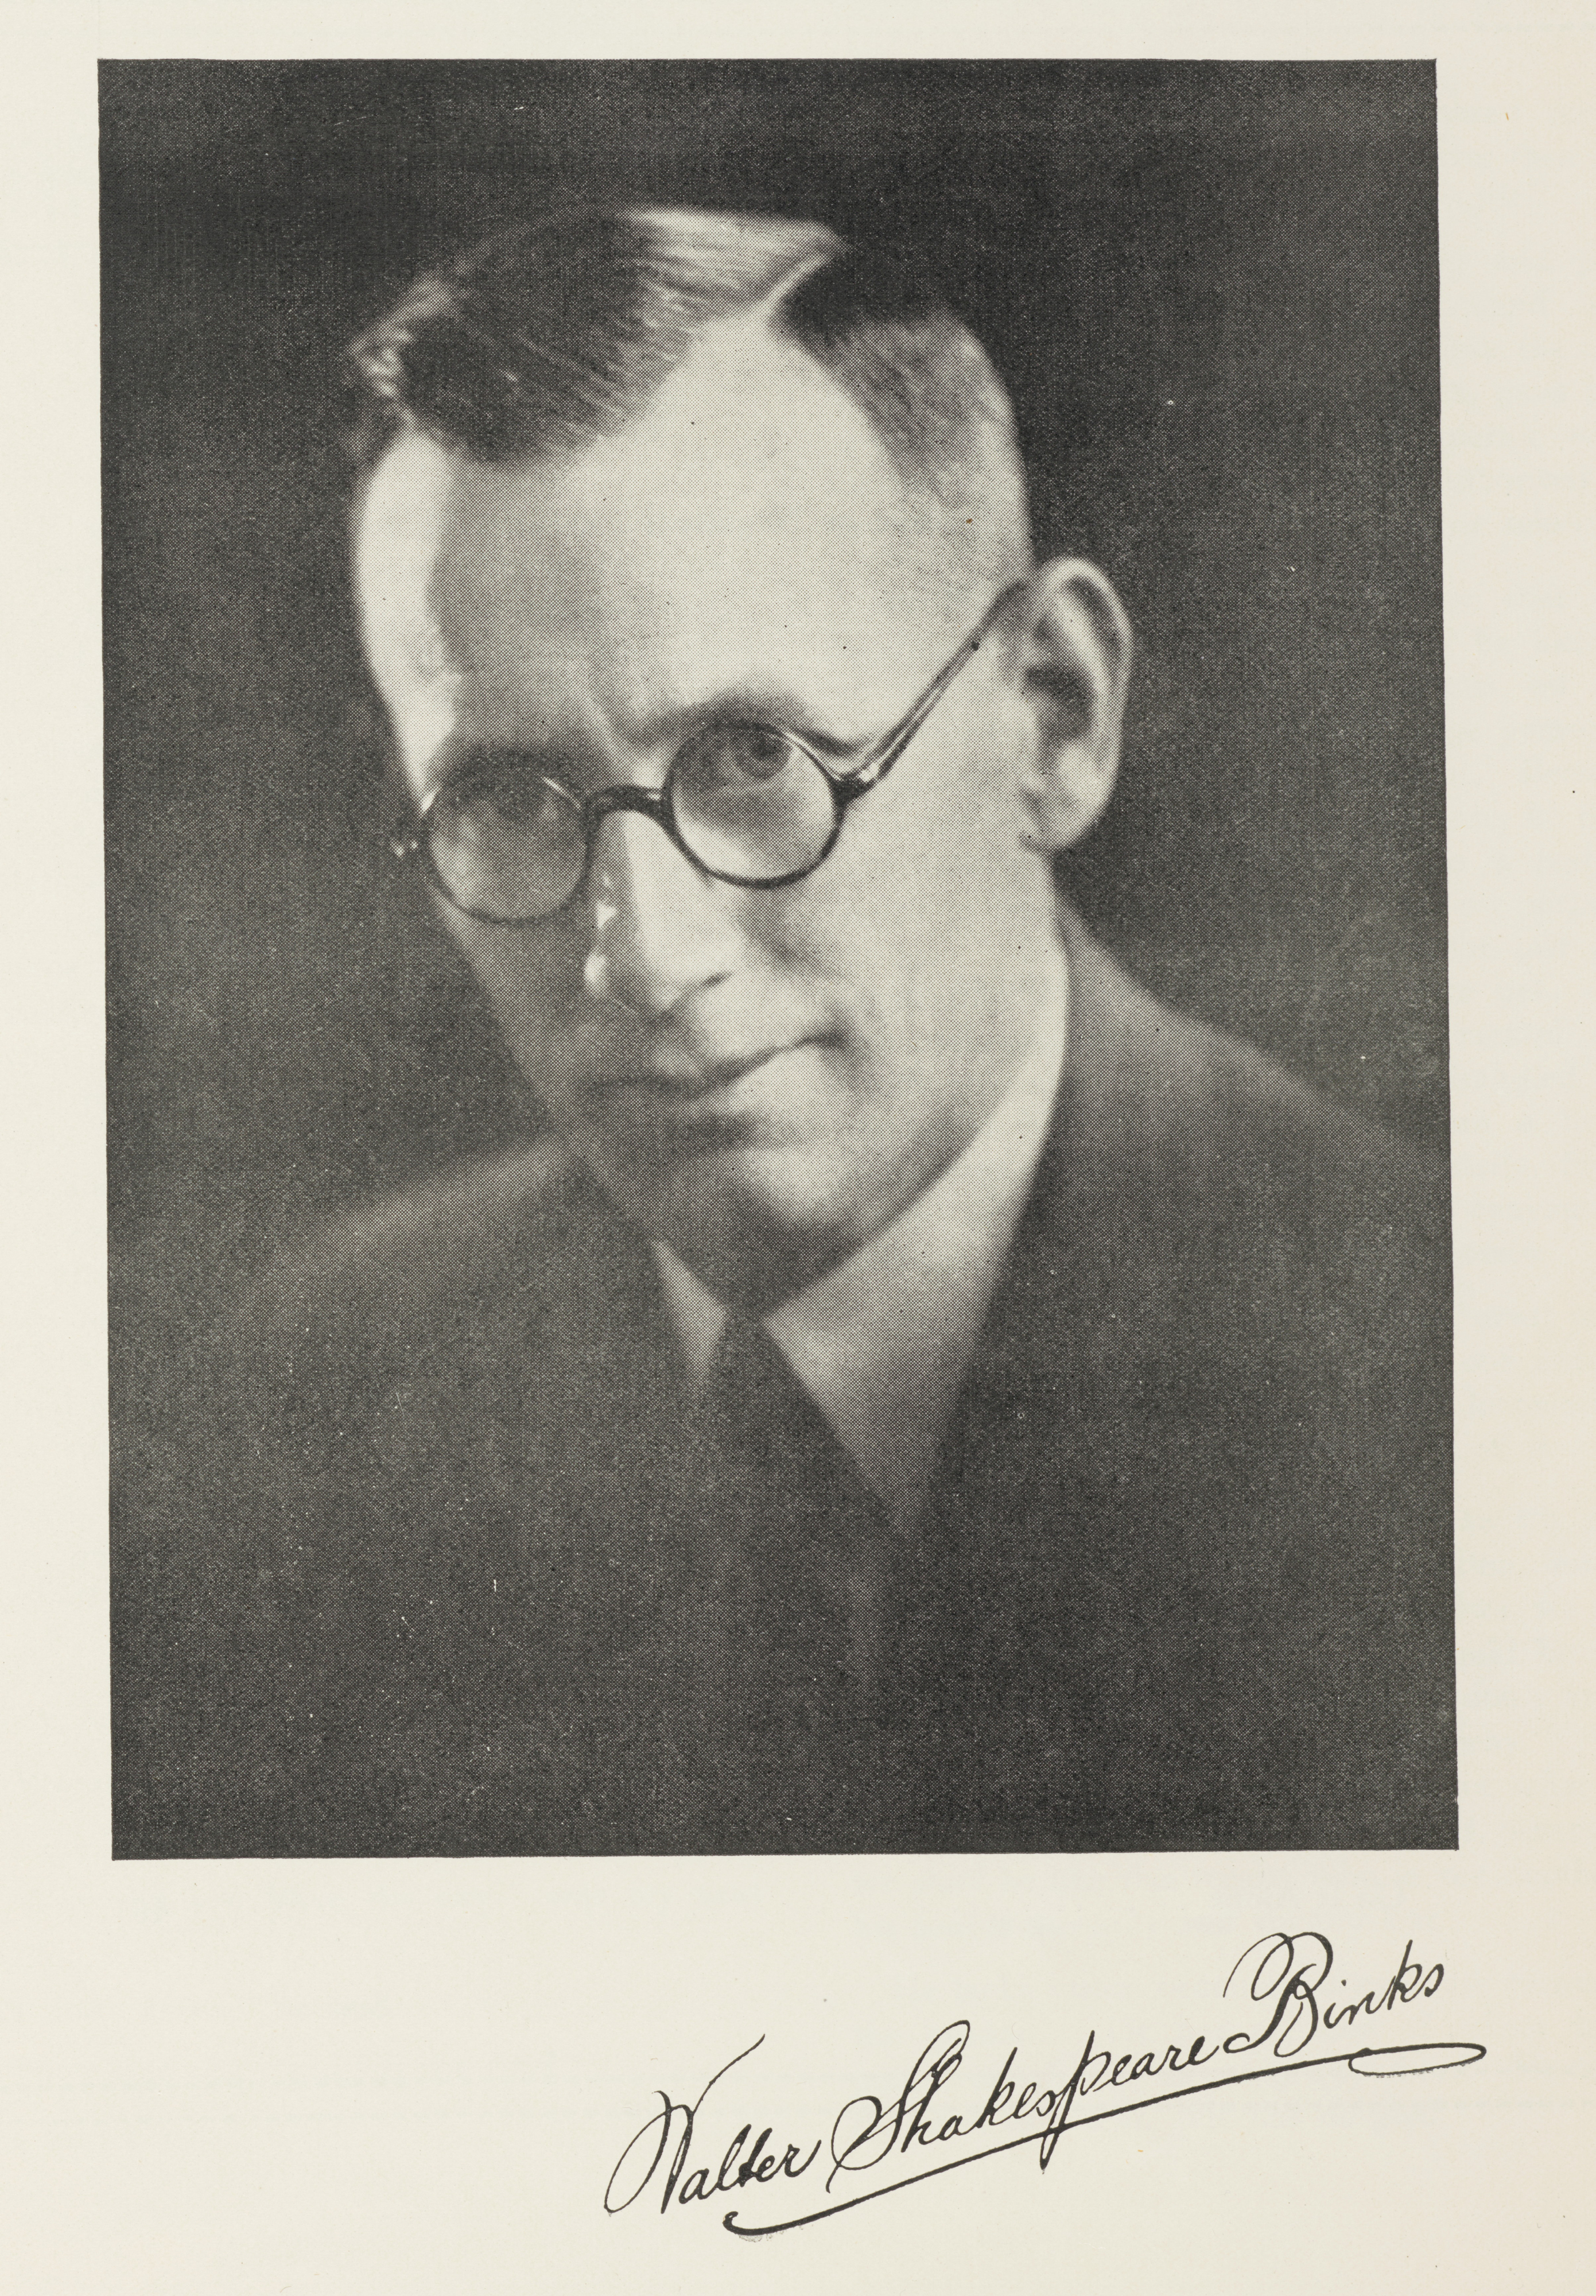 Black and white portrait photograph of a man wearing glasses.  